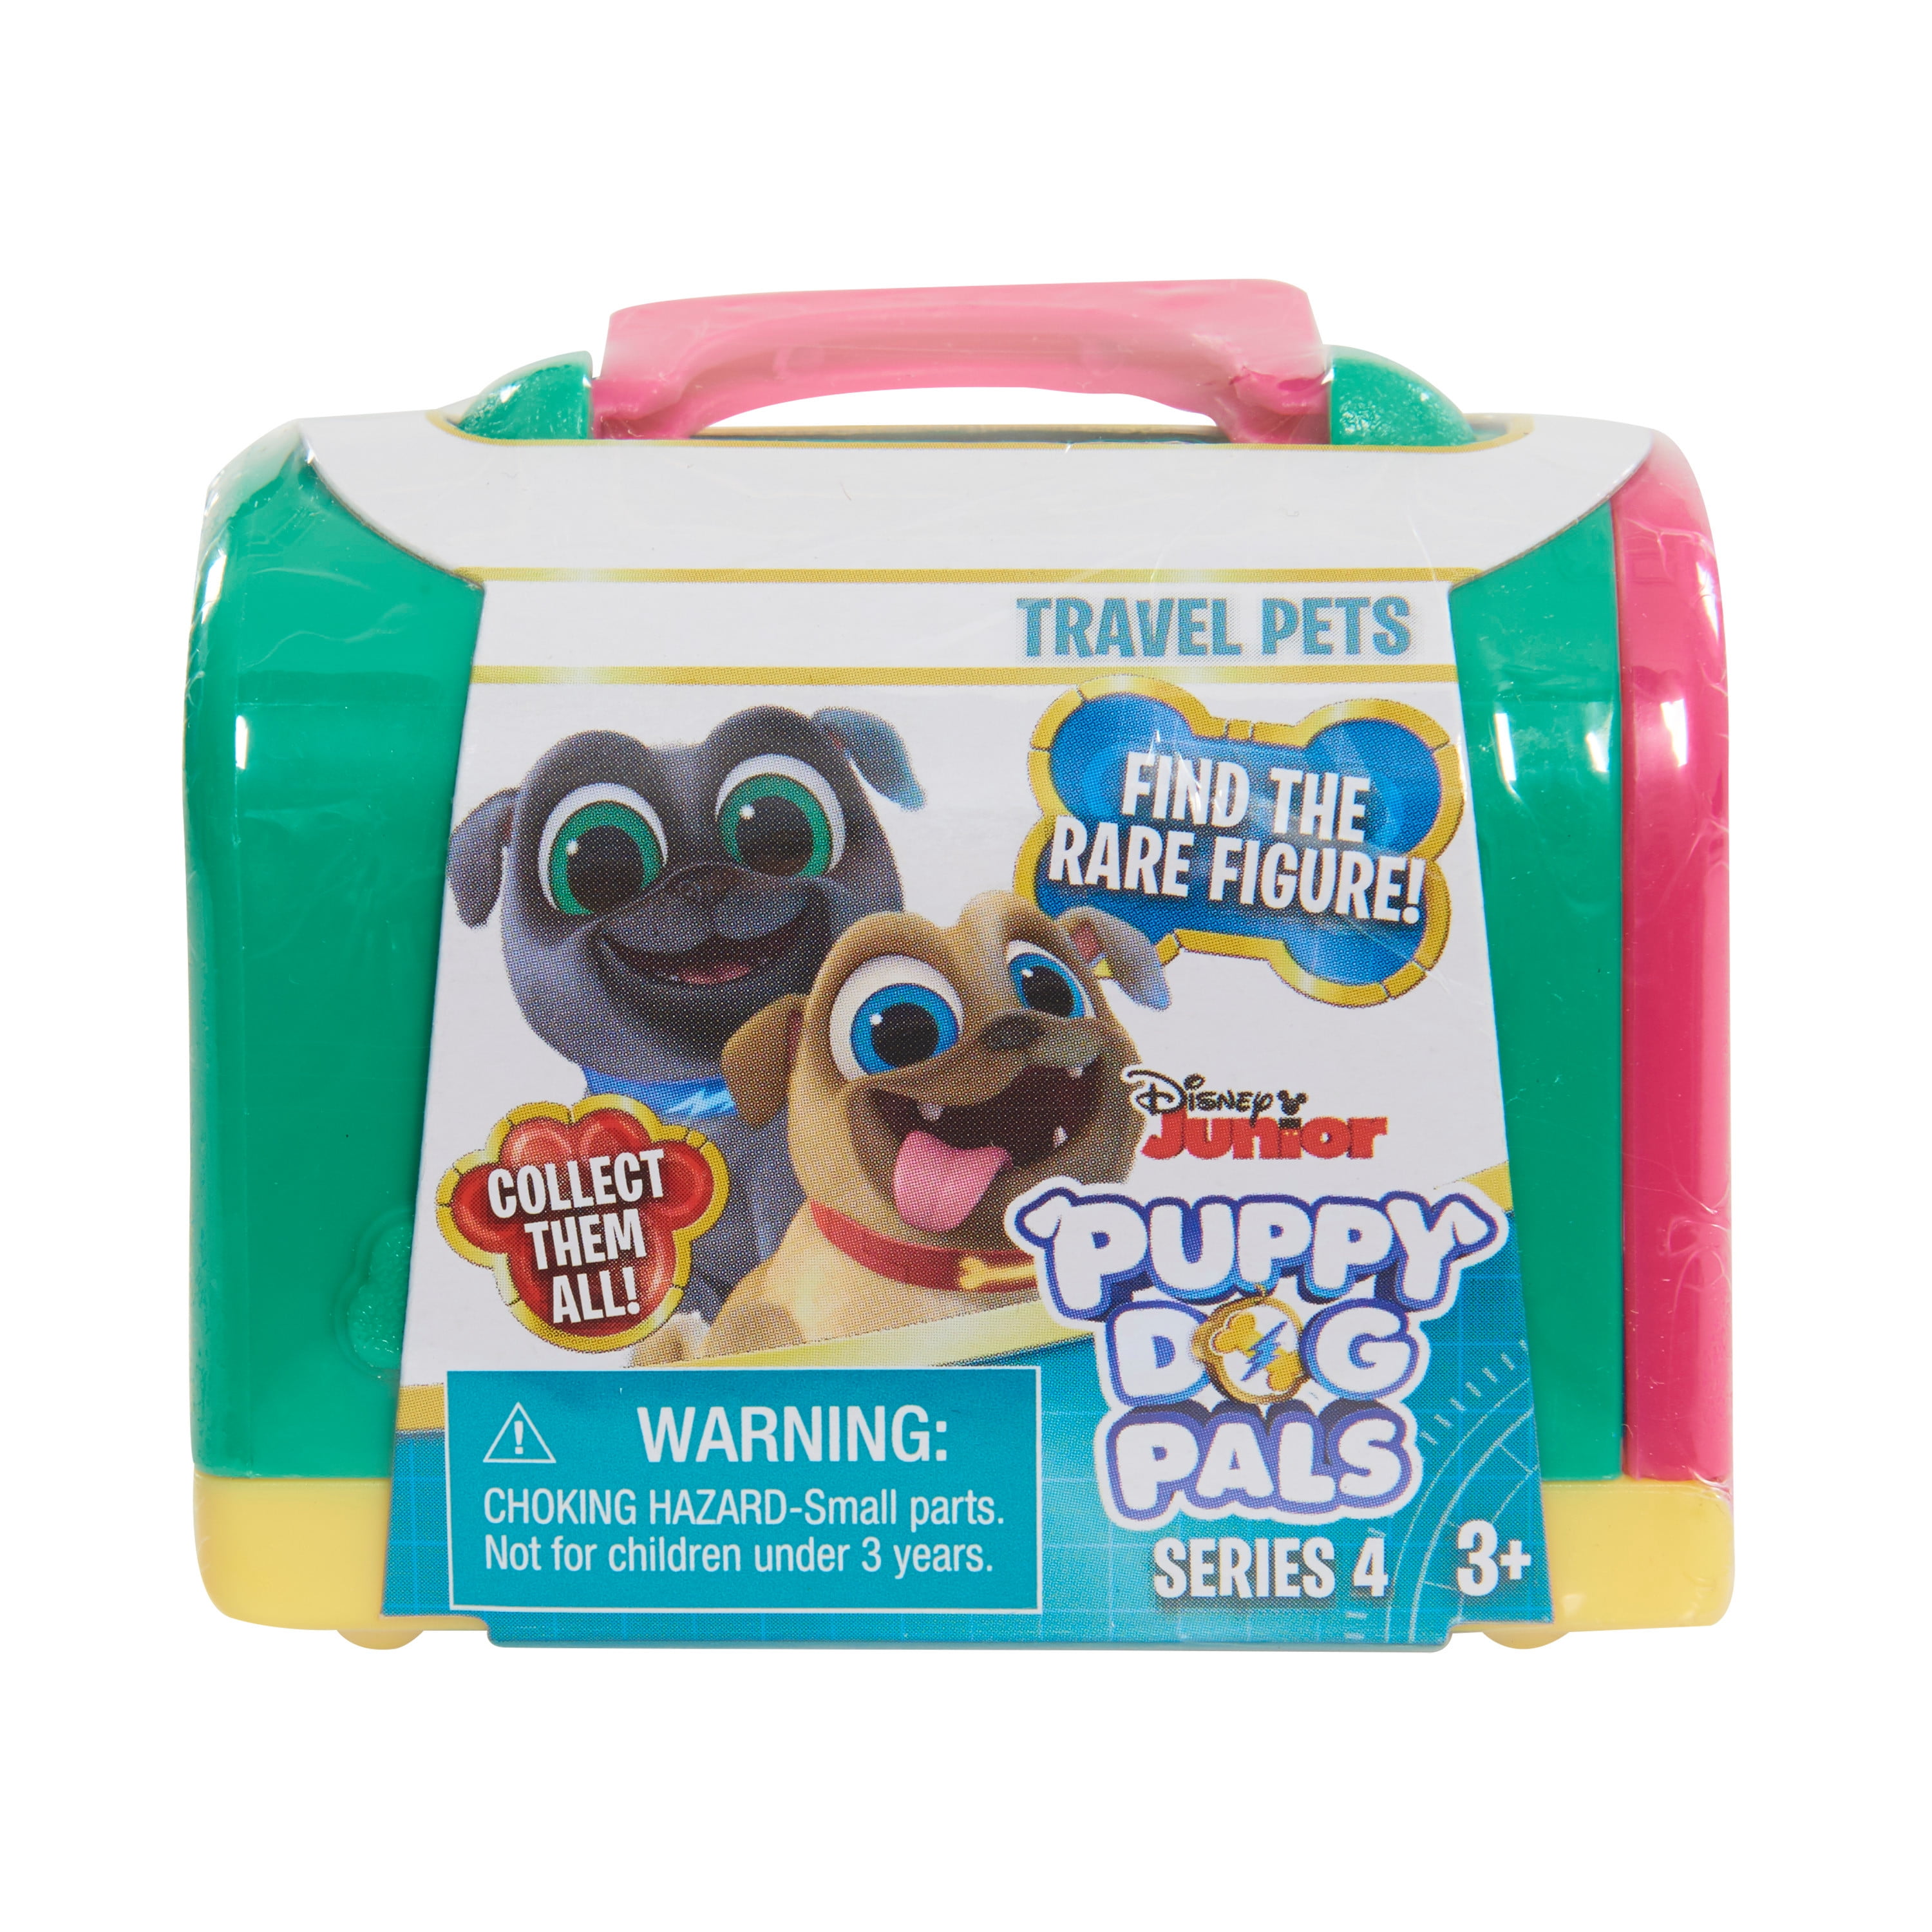 Disney Junior Puppy Dog Pals Travel Pets in Carriers Series 5 set of 4 party 